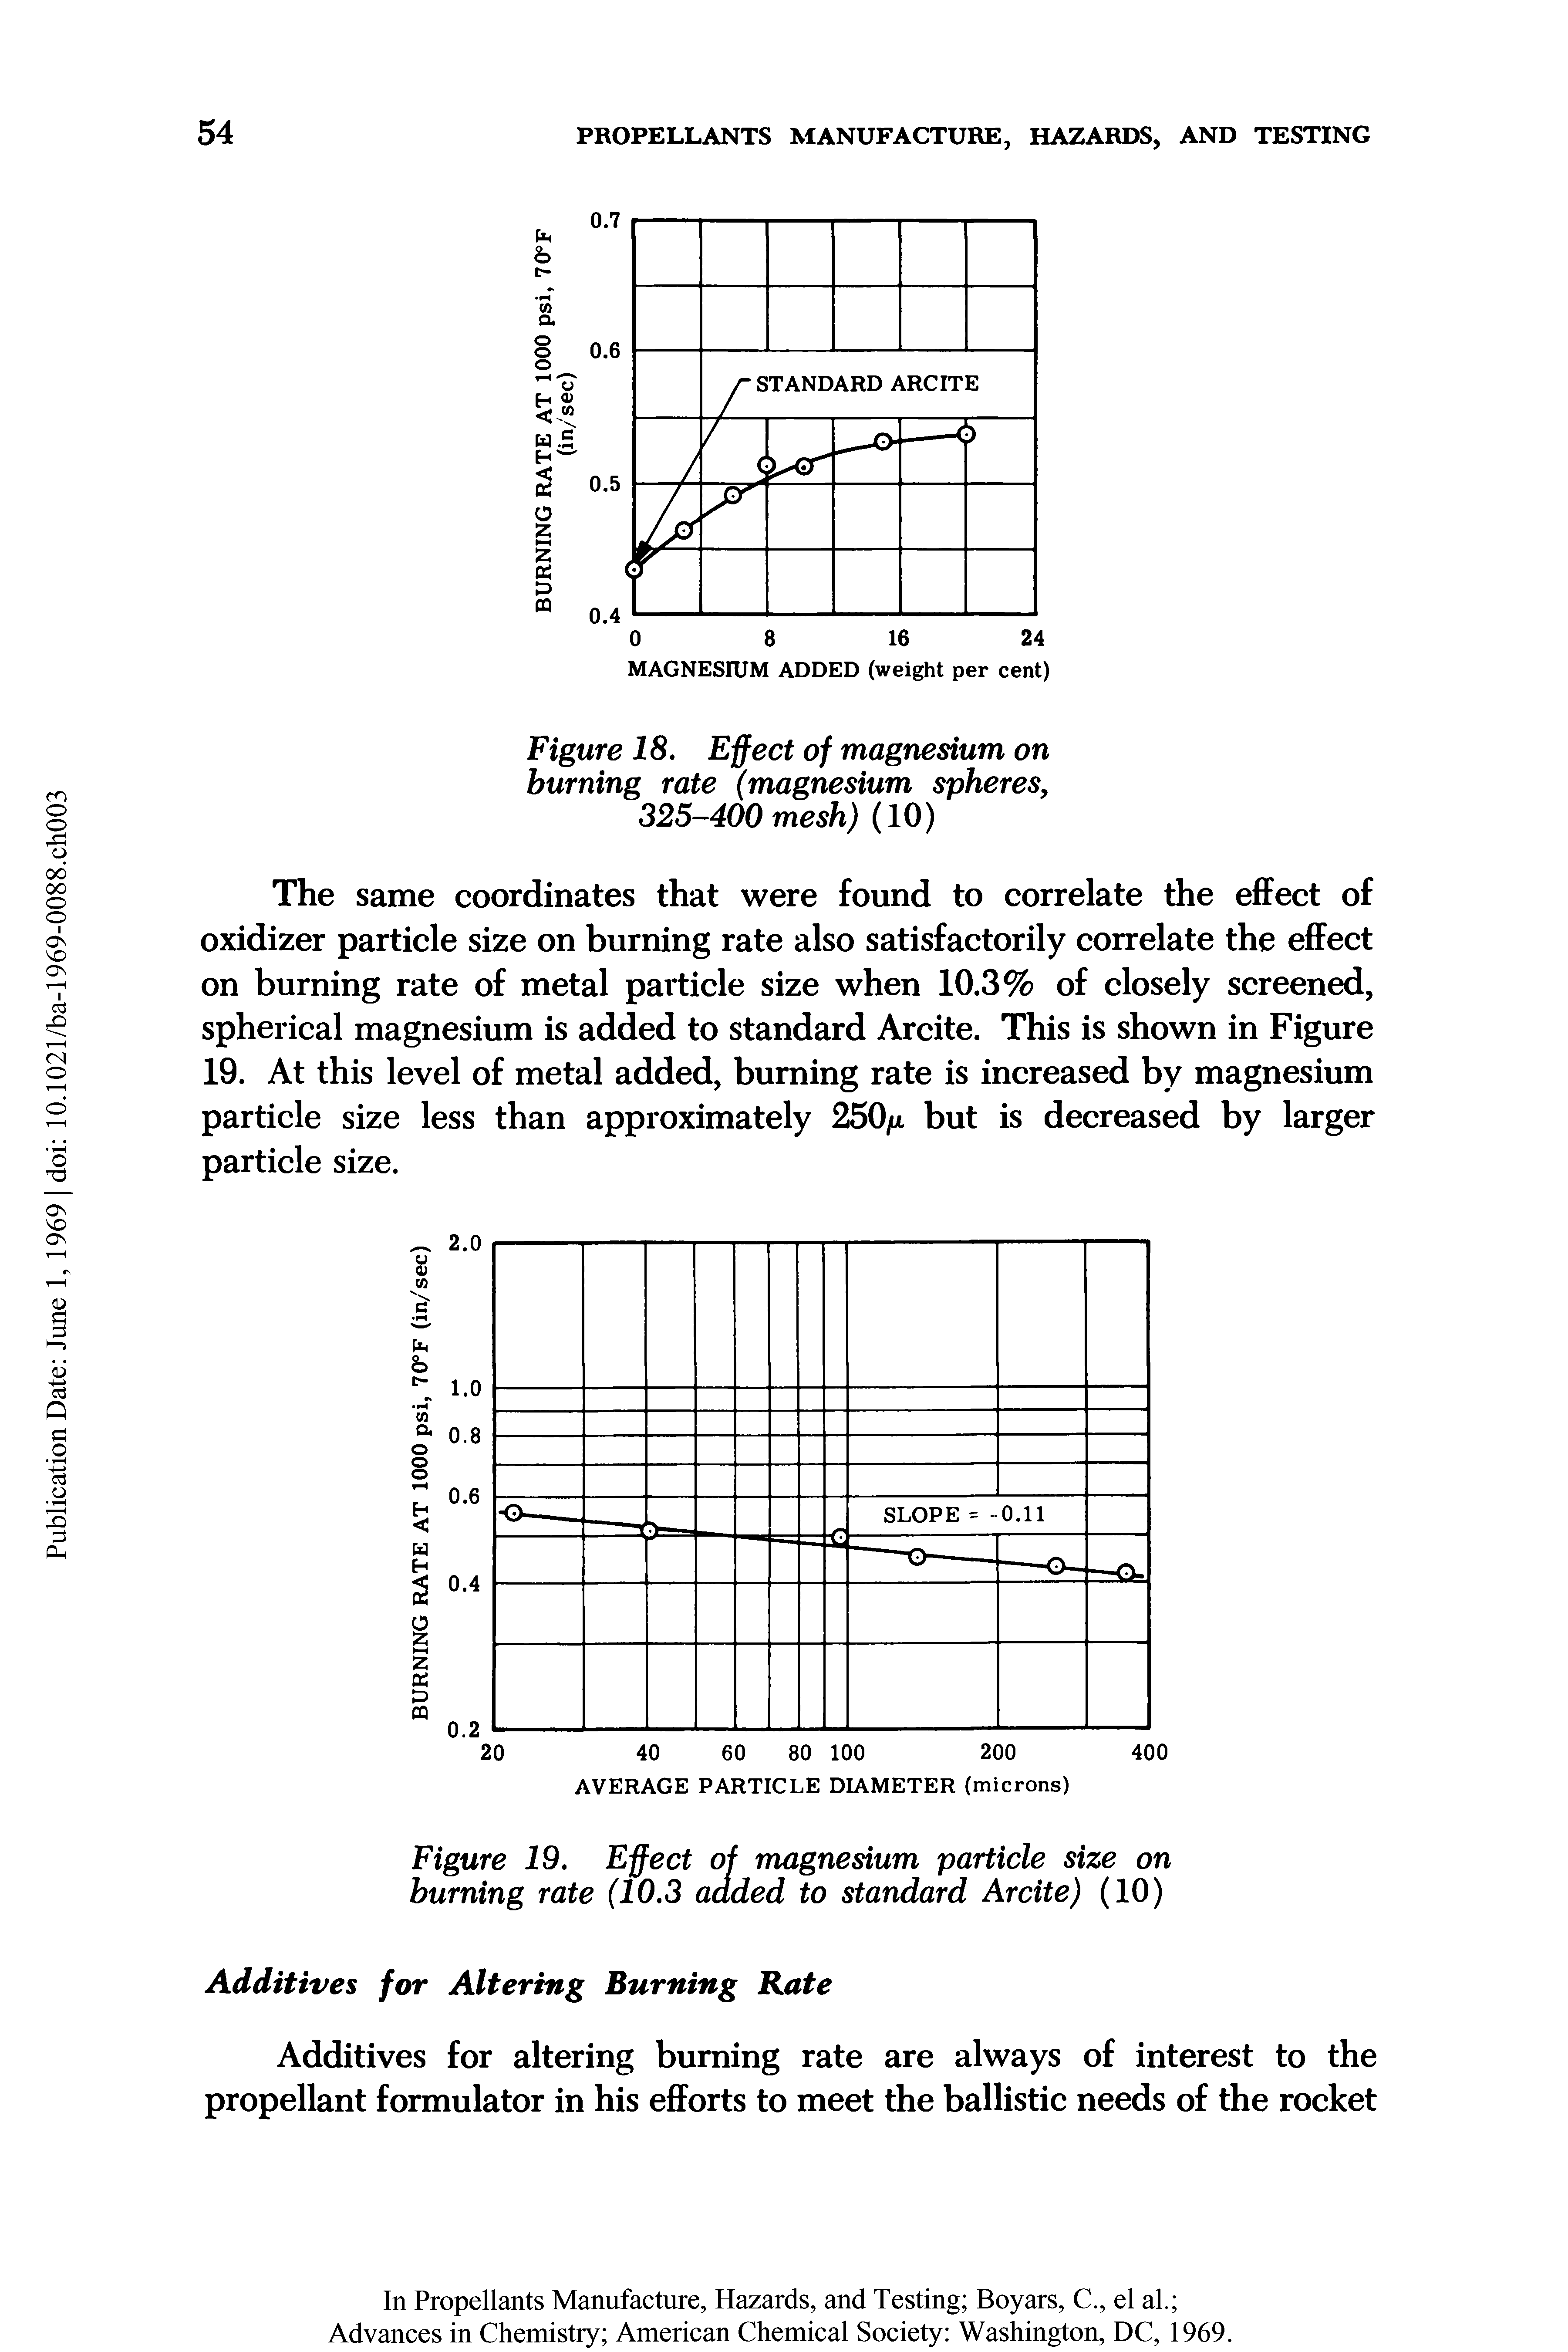 Figure 19. Effect of magnesium particle size on burning rate (10.3 added to standard Arcite) (10)...